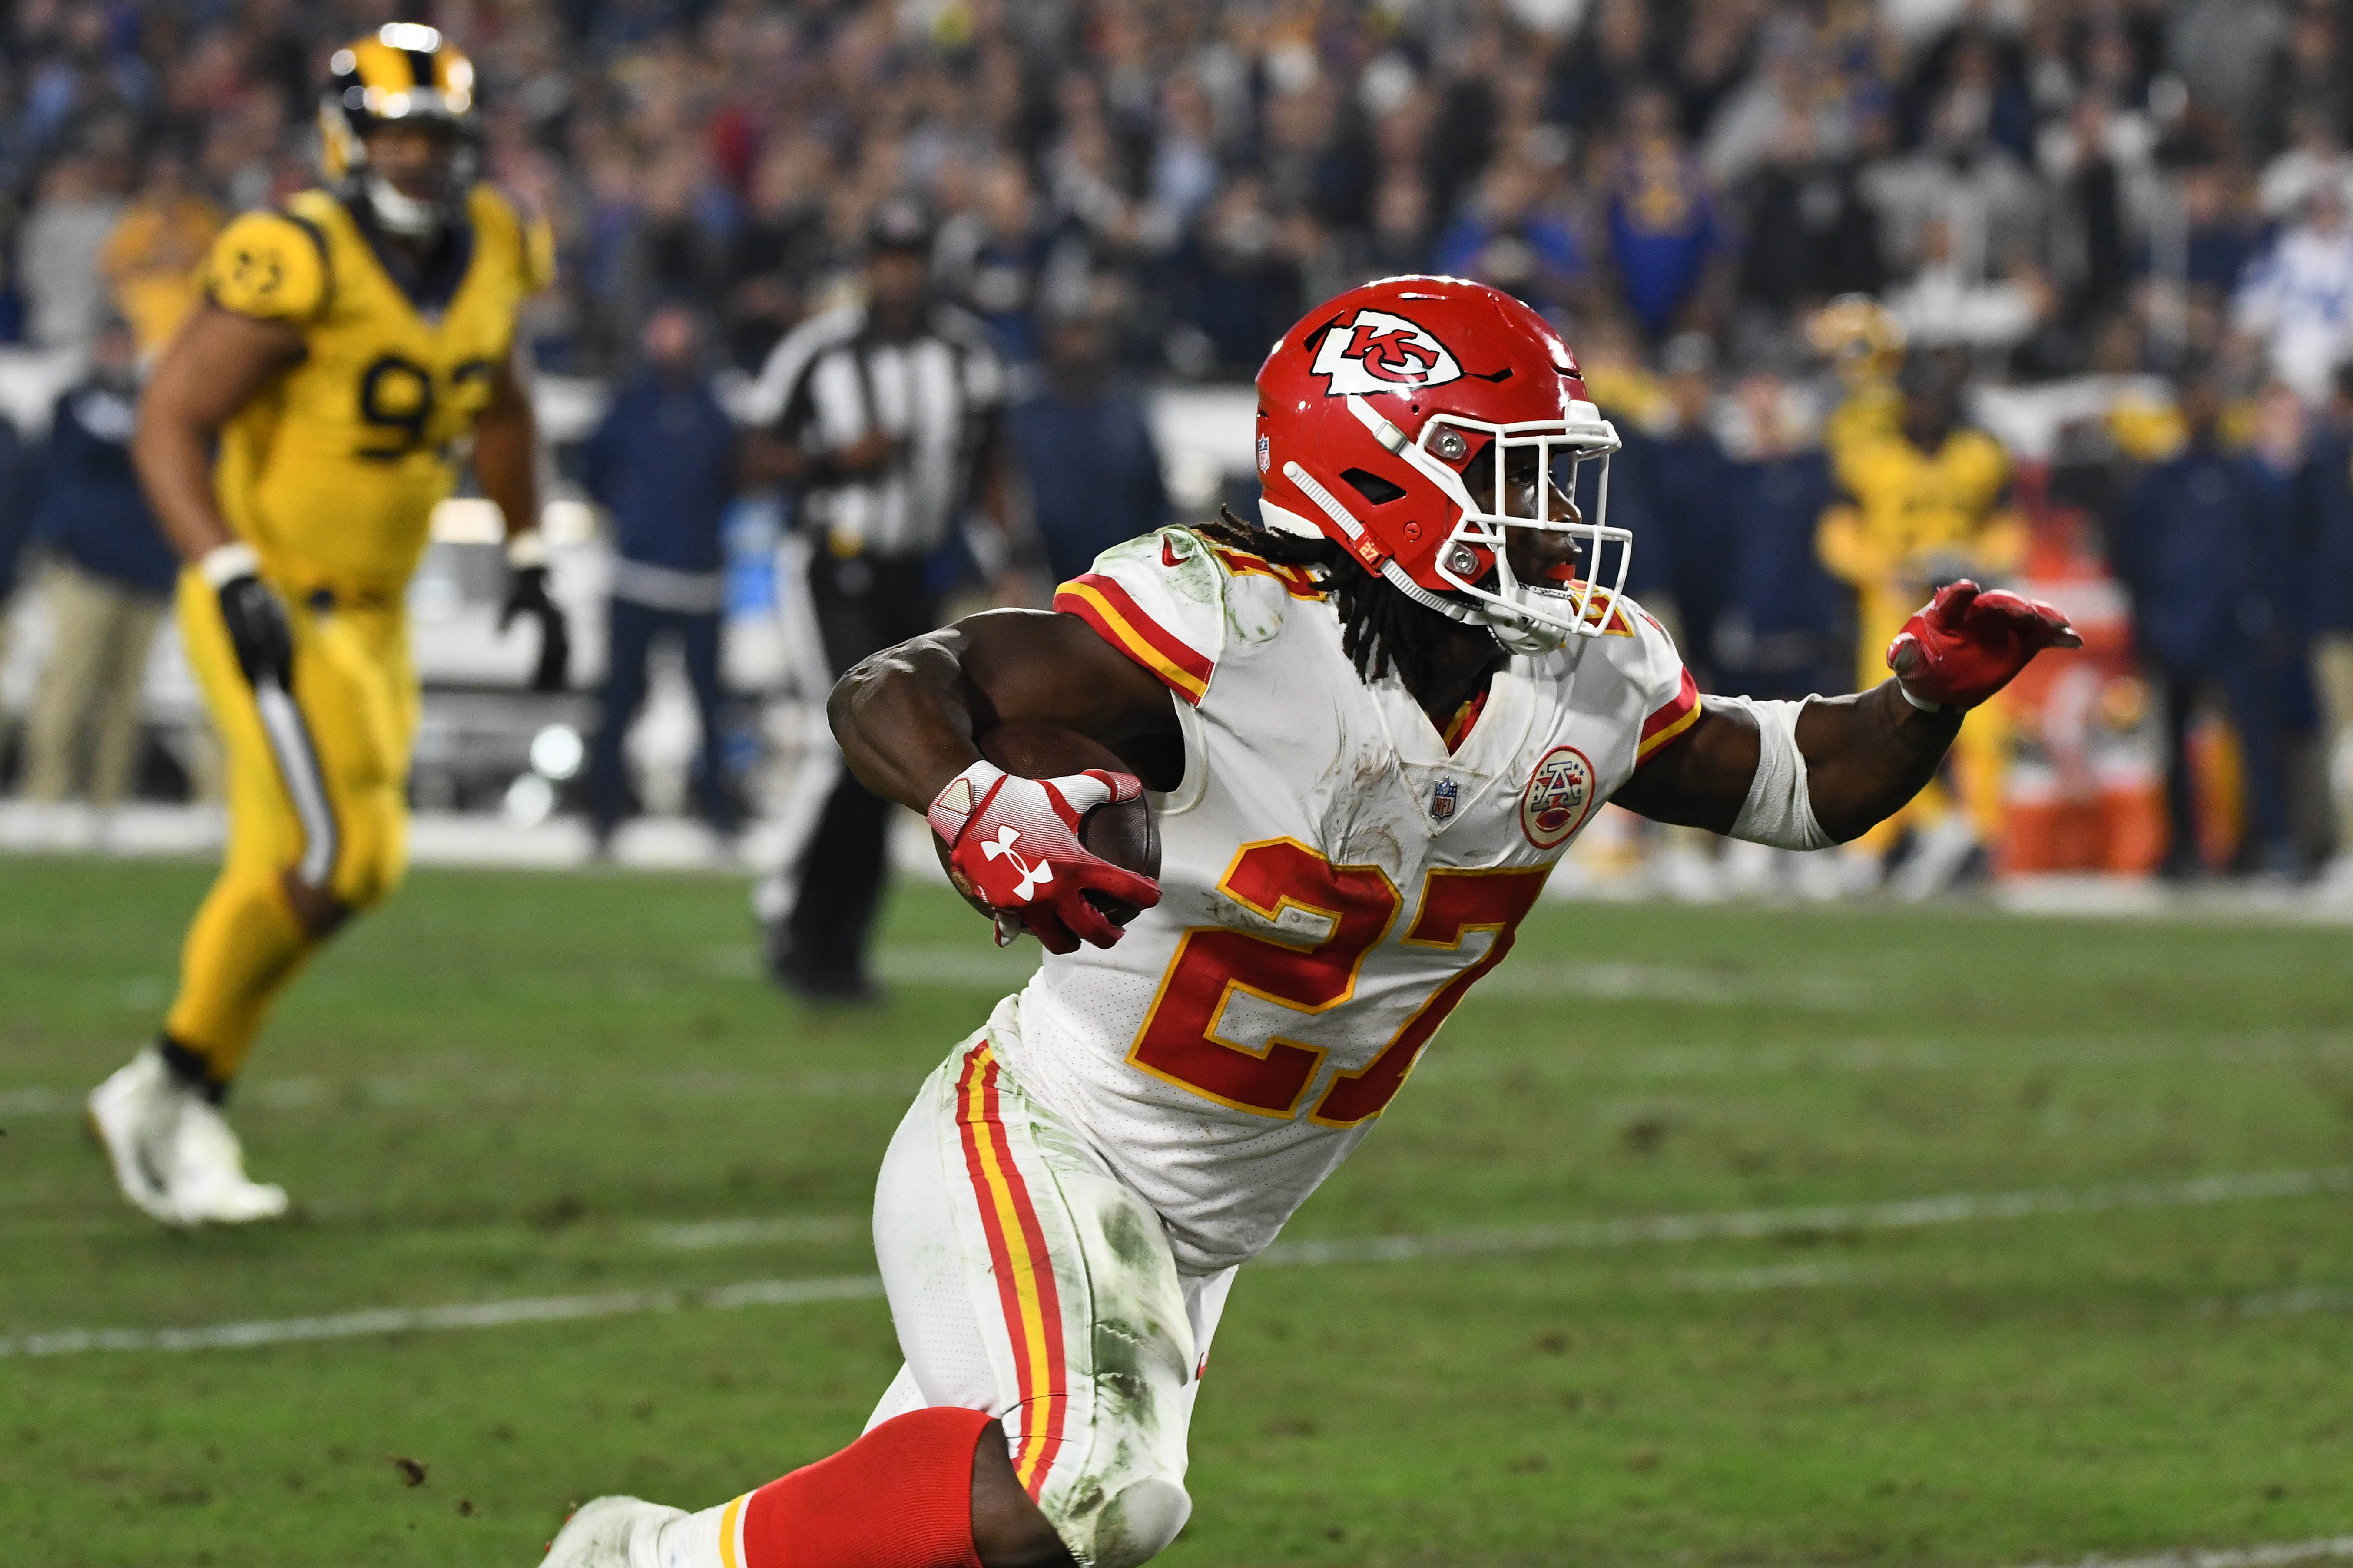 Kareem Hunt to the Eagles – Yes or No?